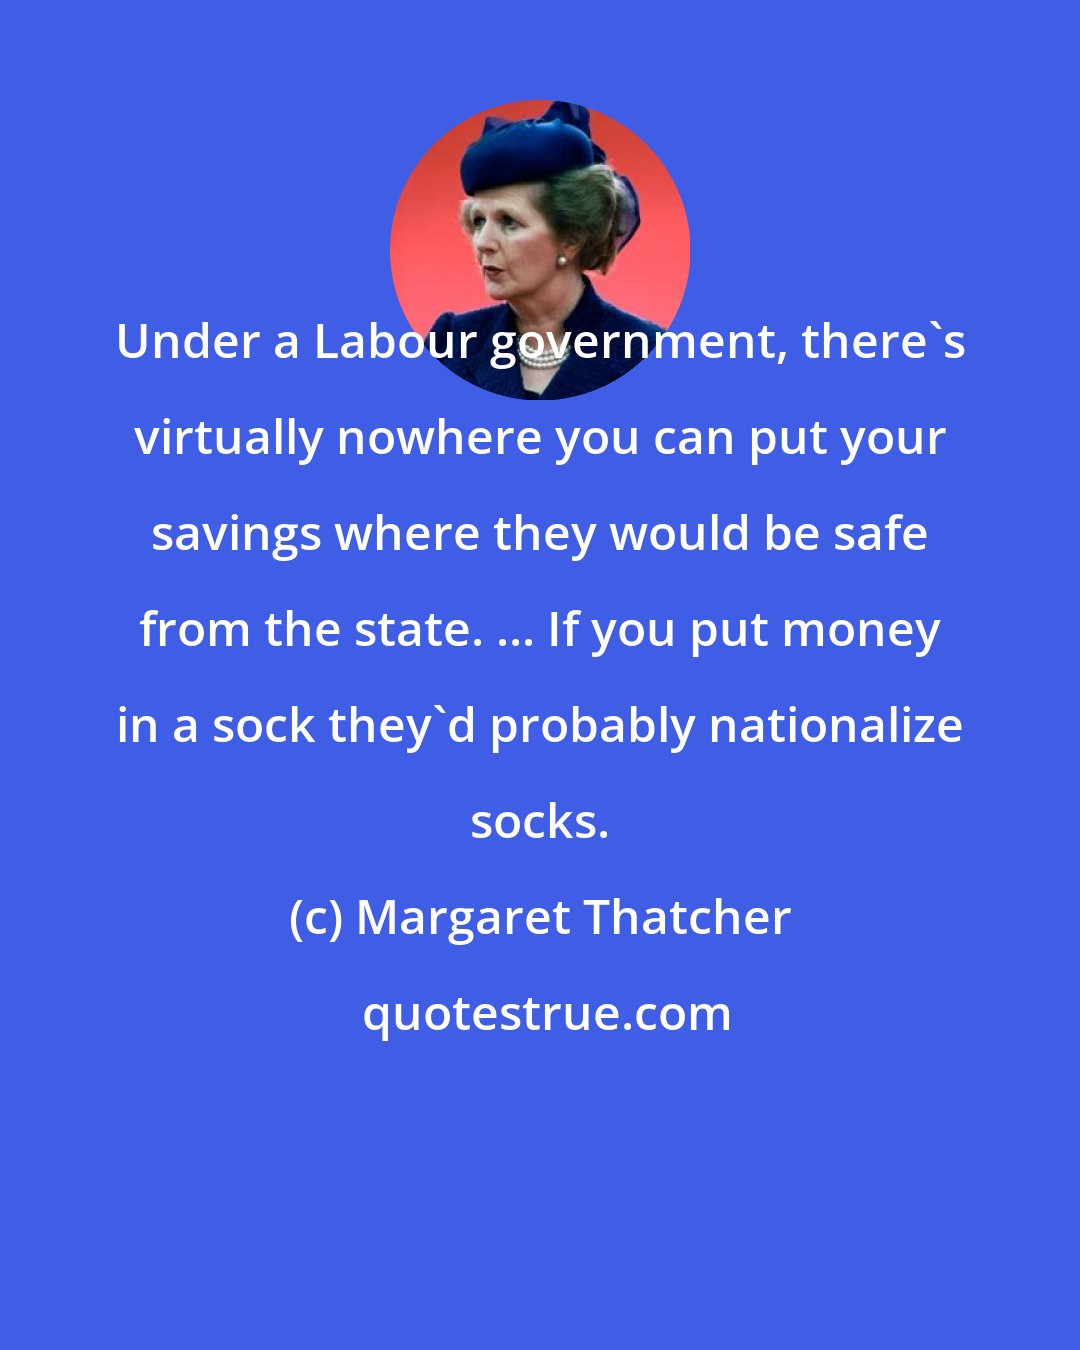 Margaret Thatcher: Under a Labour government, there's virtually nowhere you can put your savings where they would be safe from the state. ... If you put money in a sock they'd probably nationalize socks.